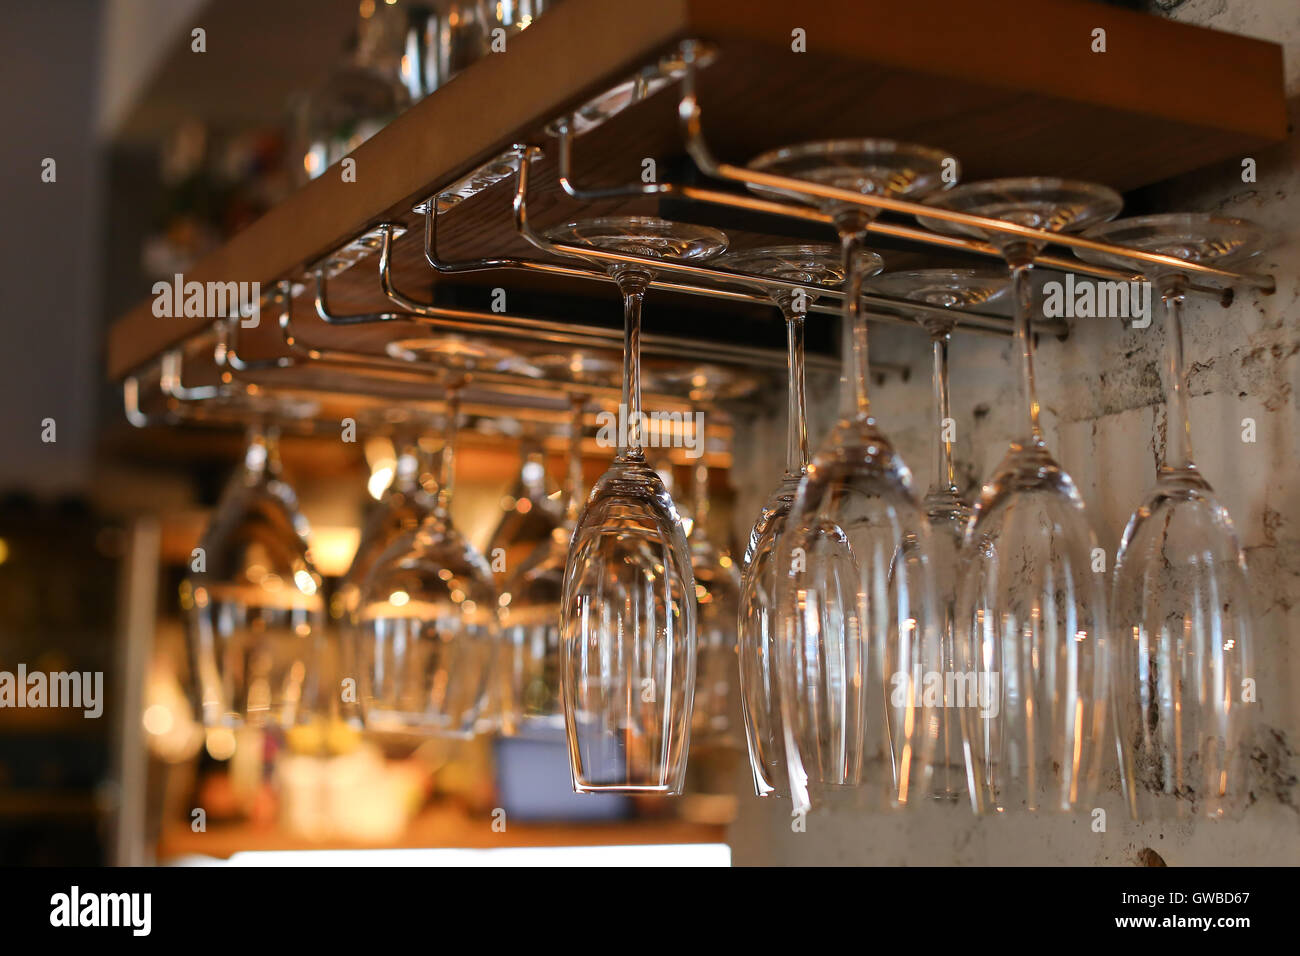 https://c8.alamy.com/comp/GWBD67/many-a-large-number-of-wine-glasses-hanging-upside-down-in-cafe-storane-GWBD67.jpg